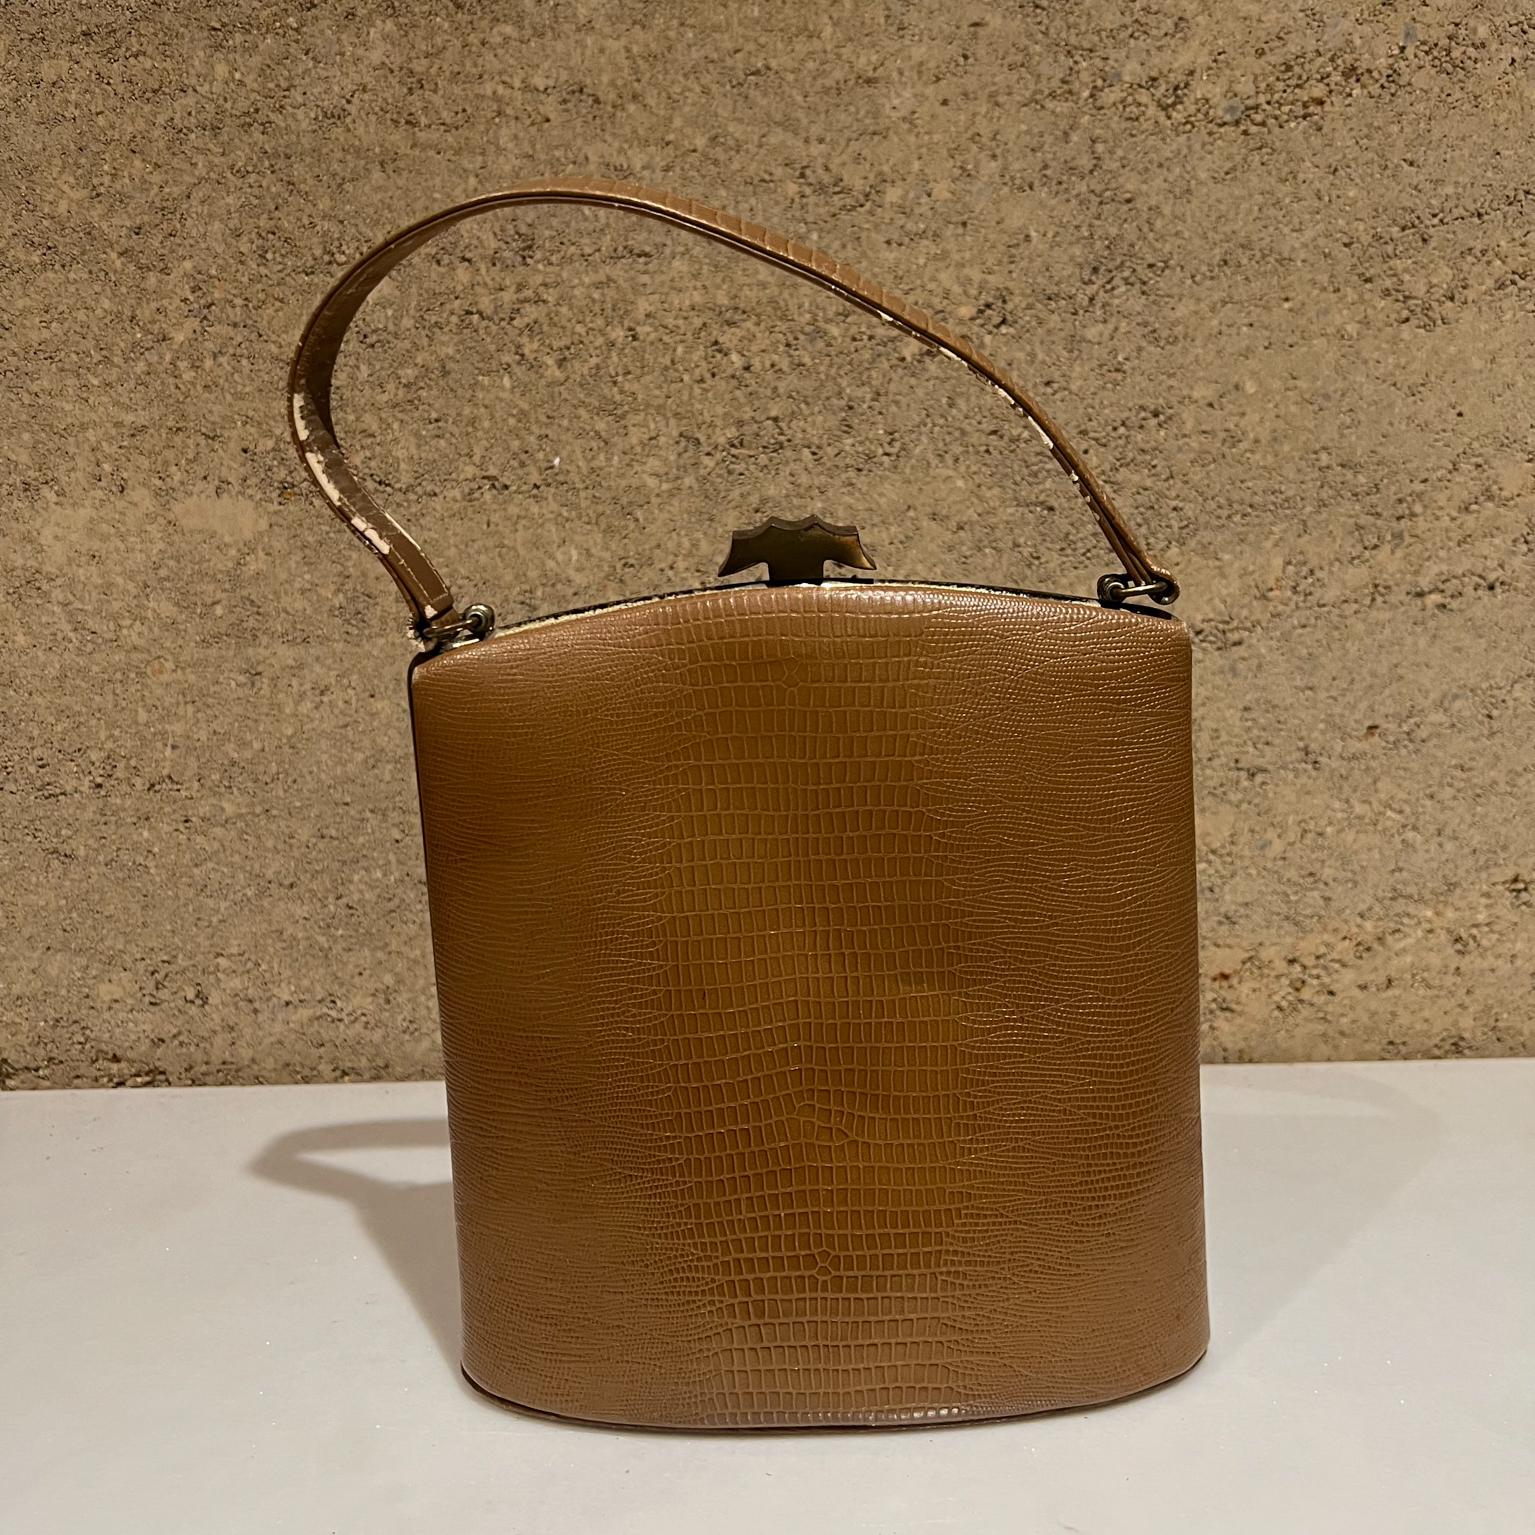 1950s California Vintage Ladies Kelly Handbag Purse May Co Original in Tan Croc with Metal Trim
14.5 tall x 8.5 tall x 3.5 d
Preowned vintage used condition. Blemishes present. Wear is visible.
Review all images.

 